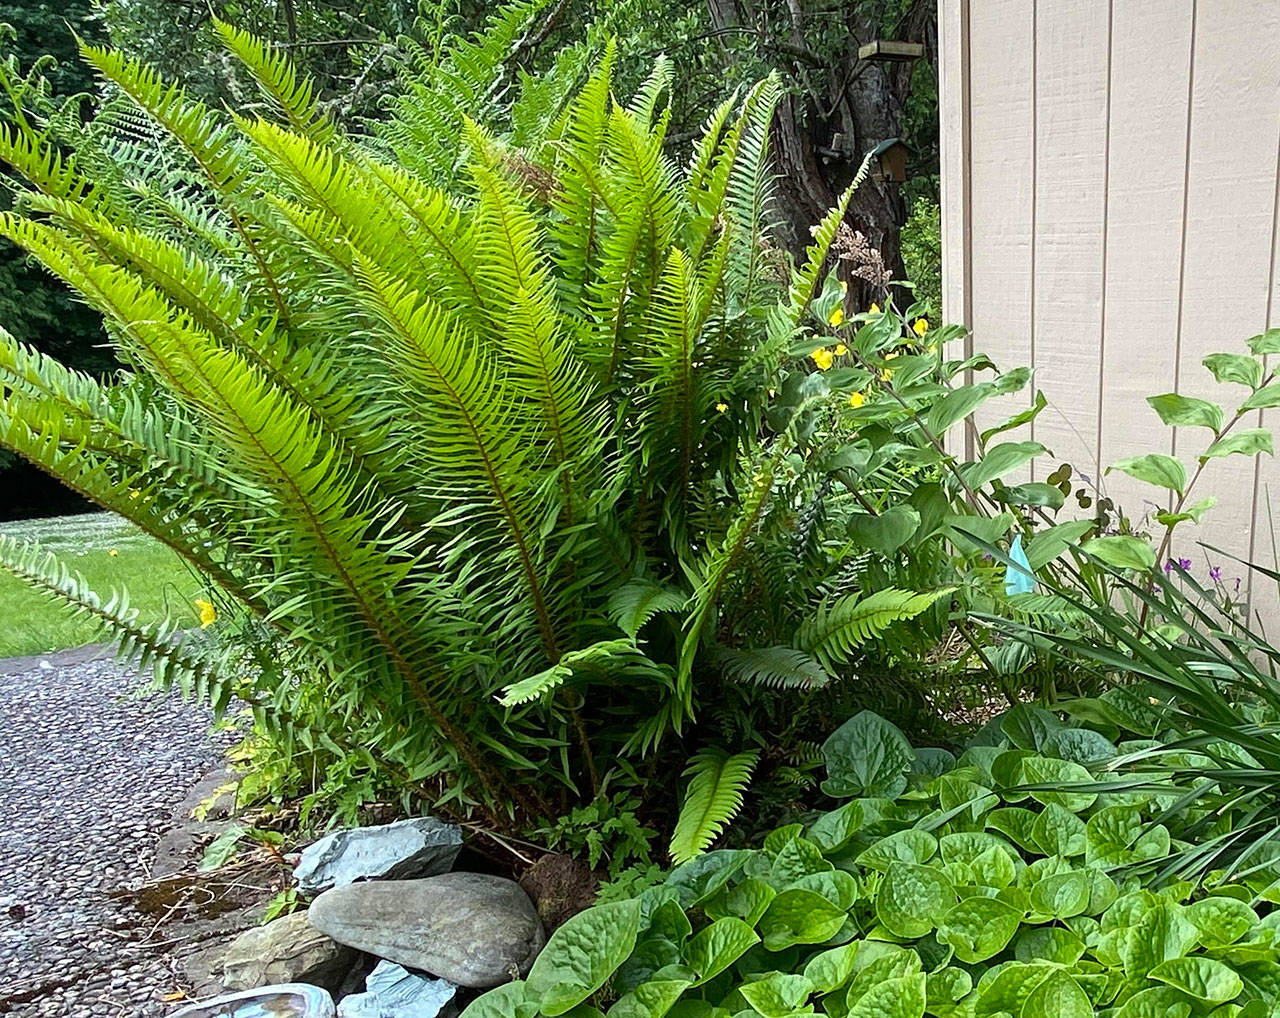 The native sword fern is drought tolerant and yet thrives in moist, shady woodland settings. Photo by Sandy Cortez